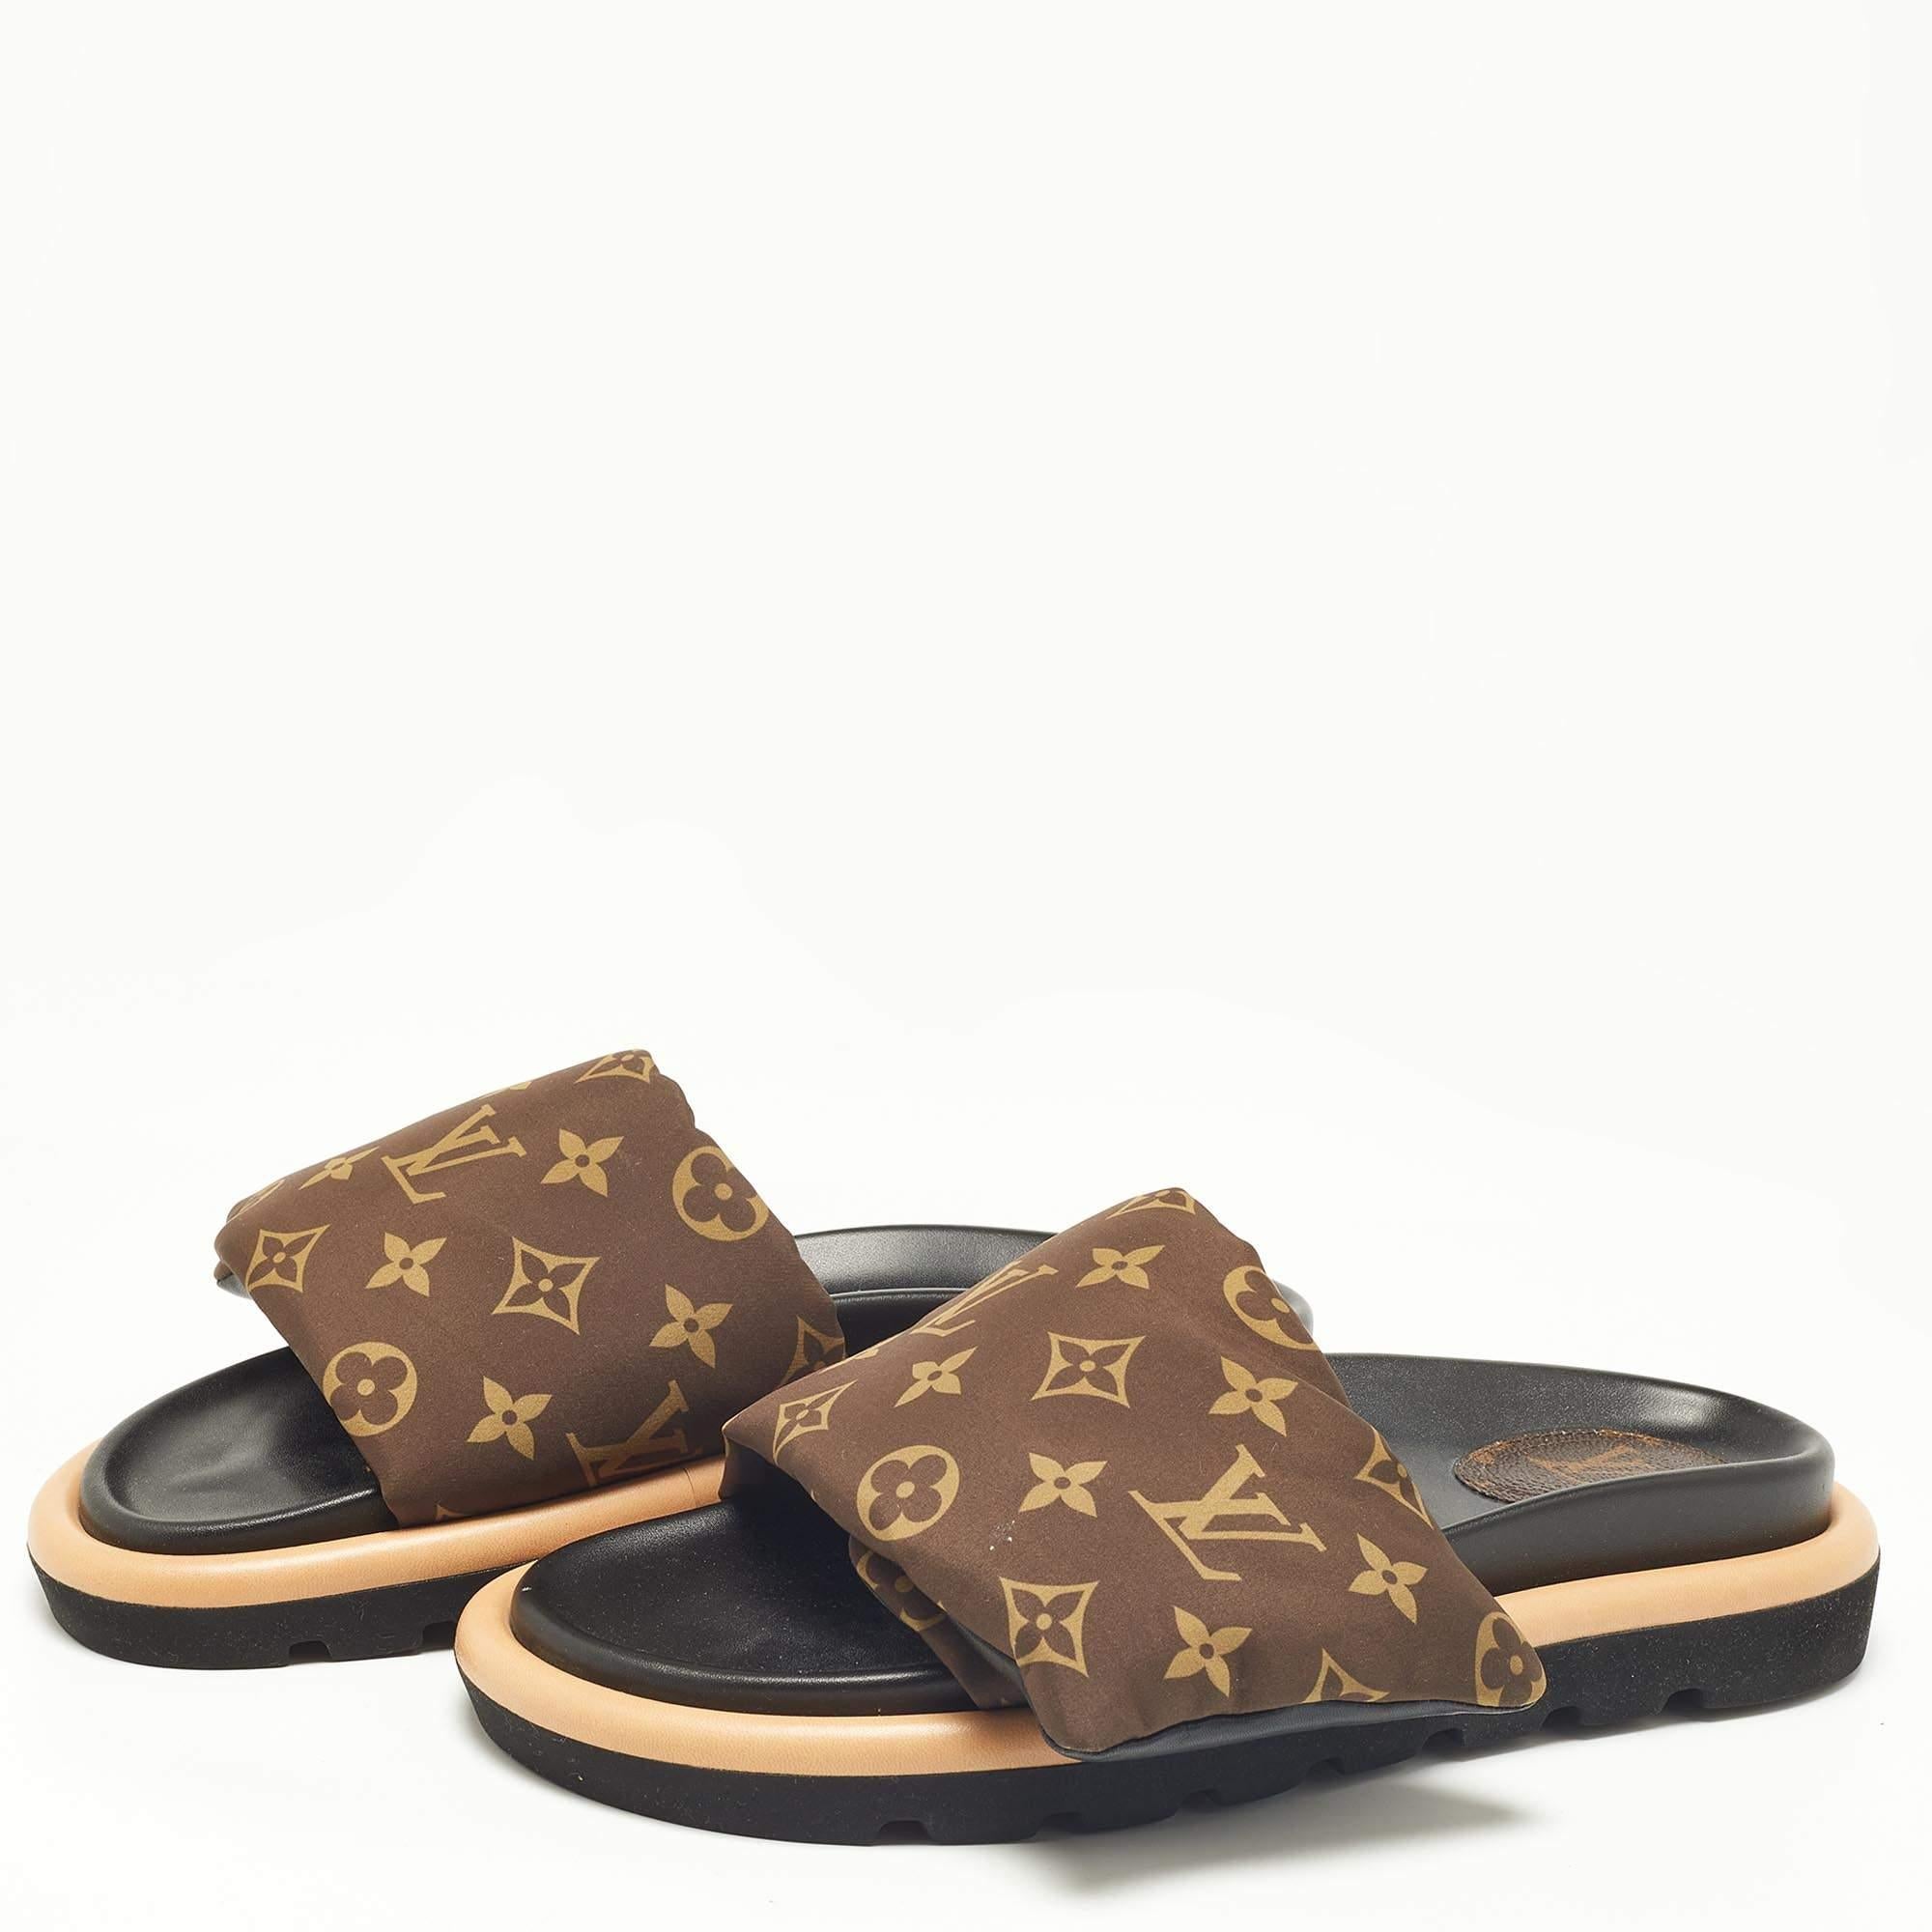 A perfect blend of luxury, style, and comfort, these Louis Vuitton slides are made using quality materials and frame your feet in the most practical way. They can be paired with a host of outfits from your wardrobe.

Includes: Original Dustbag,